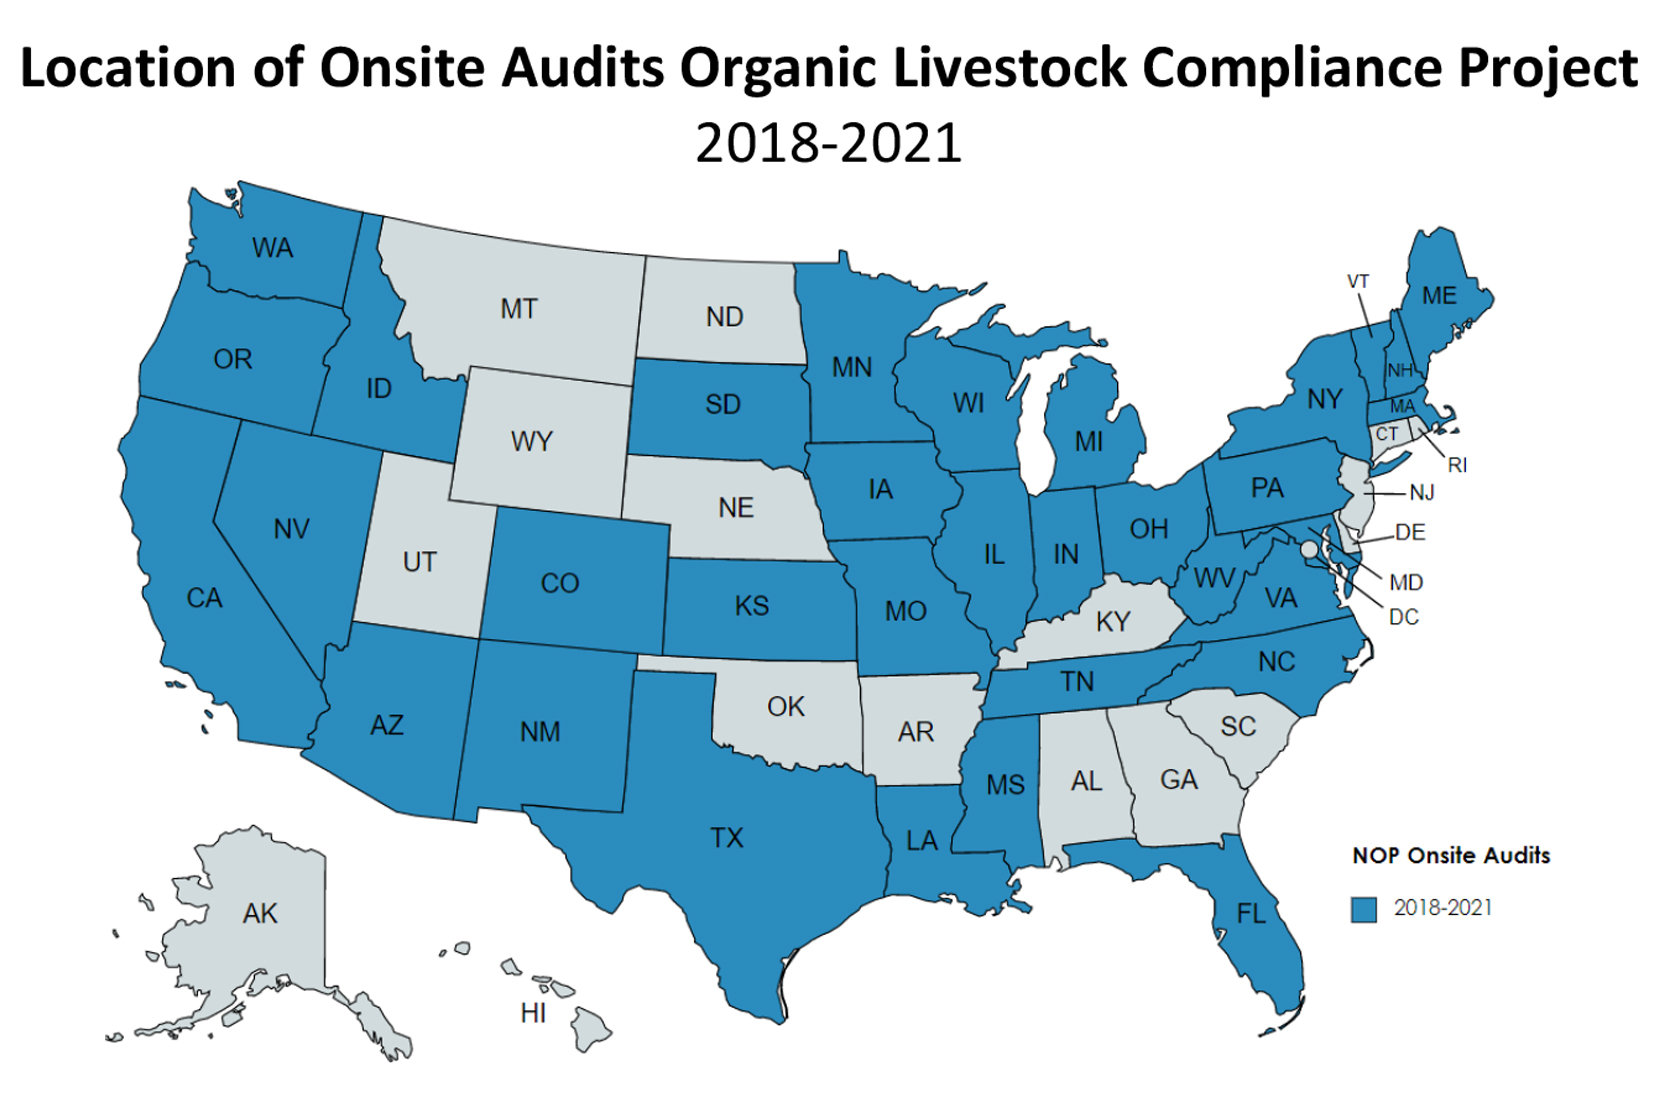 United States map showing location of onsite audits Organic Livestock Project Compliance from 2018 to 2021